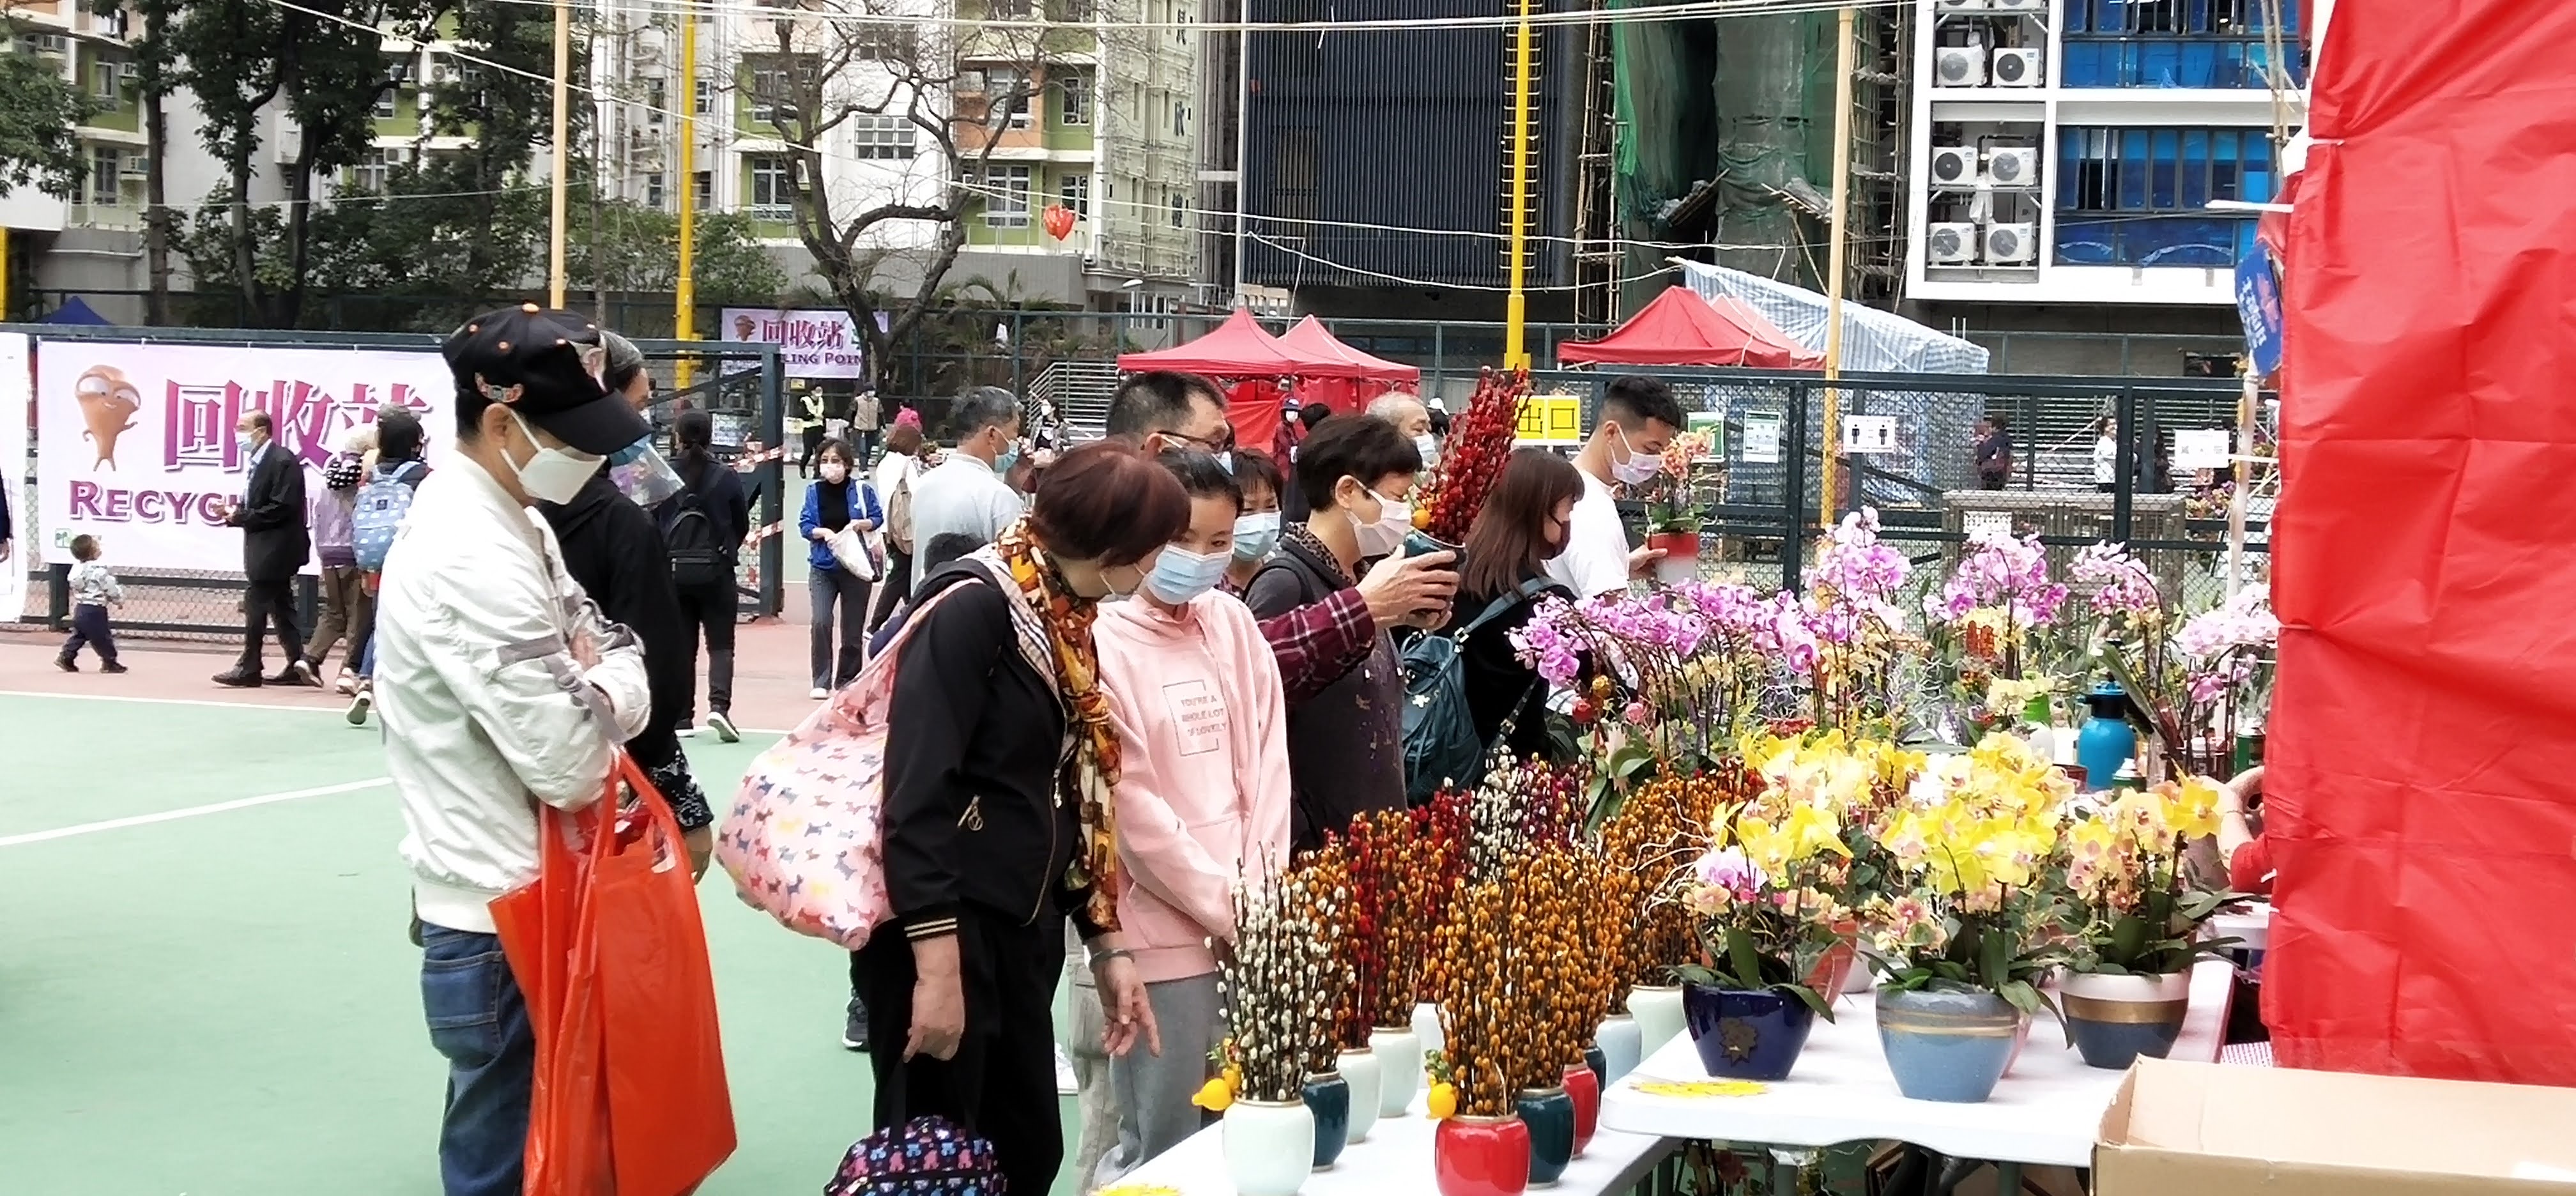 Citizens can buy flowers easily at the Point of Sale of New Year Flowers